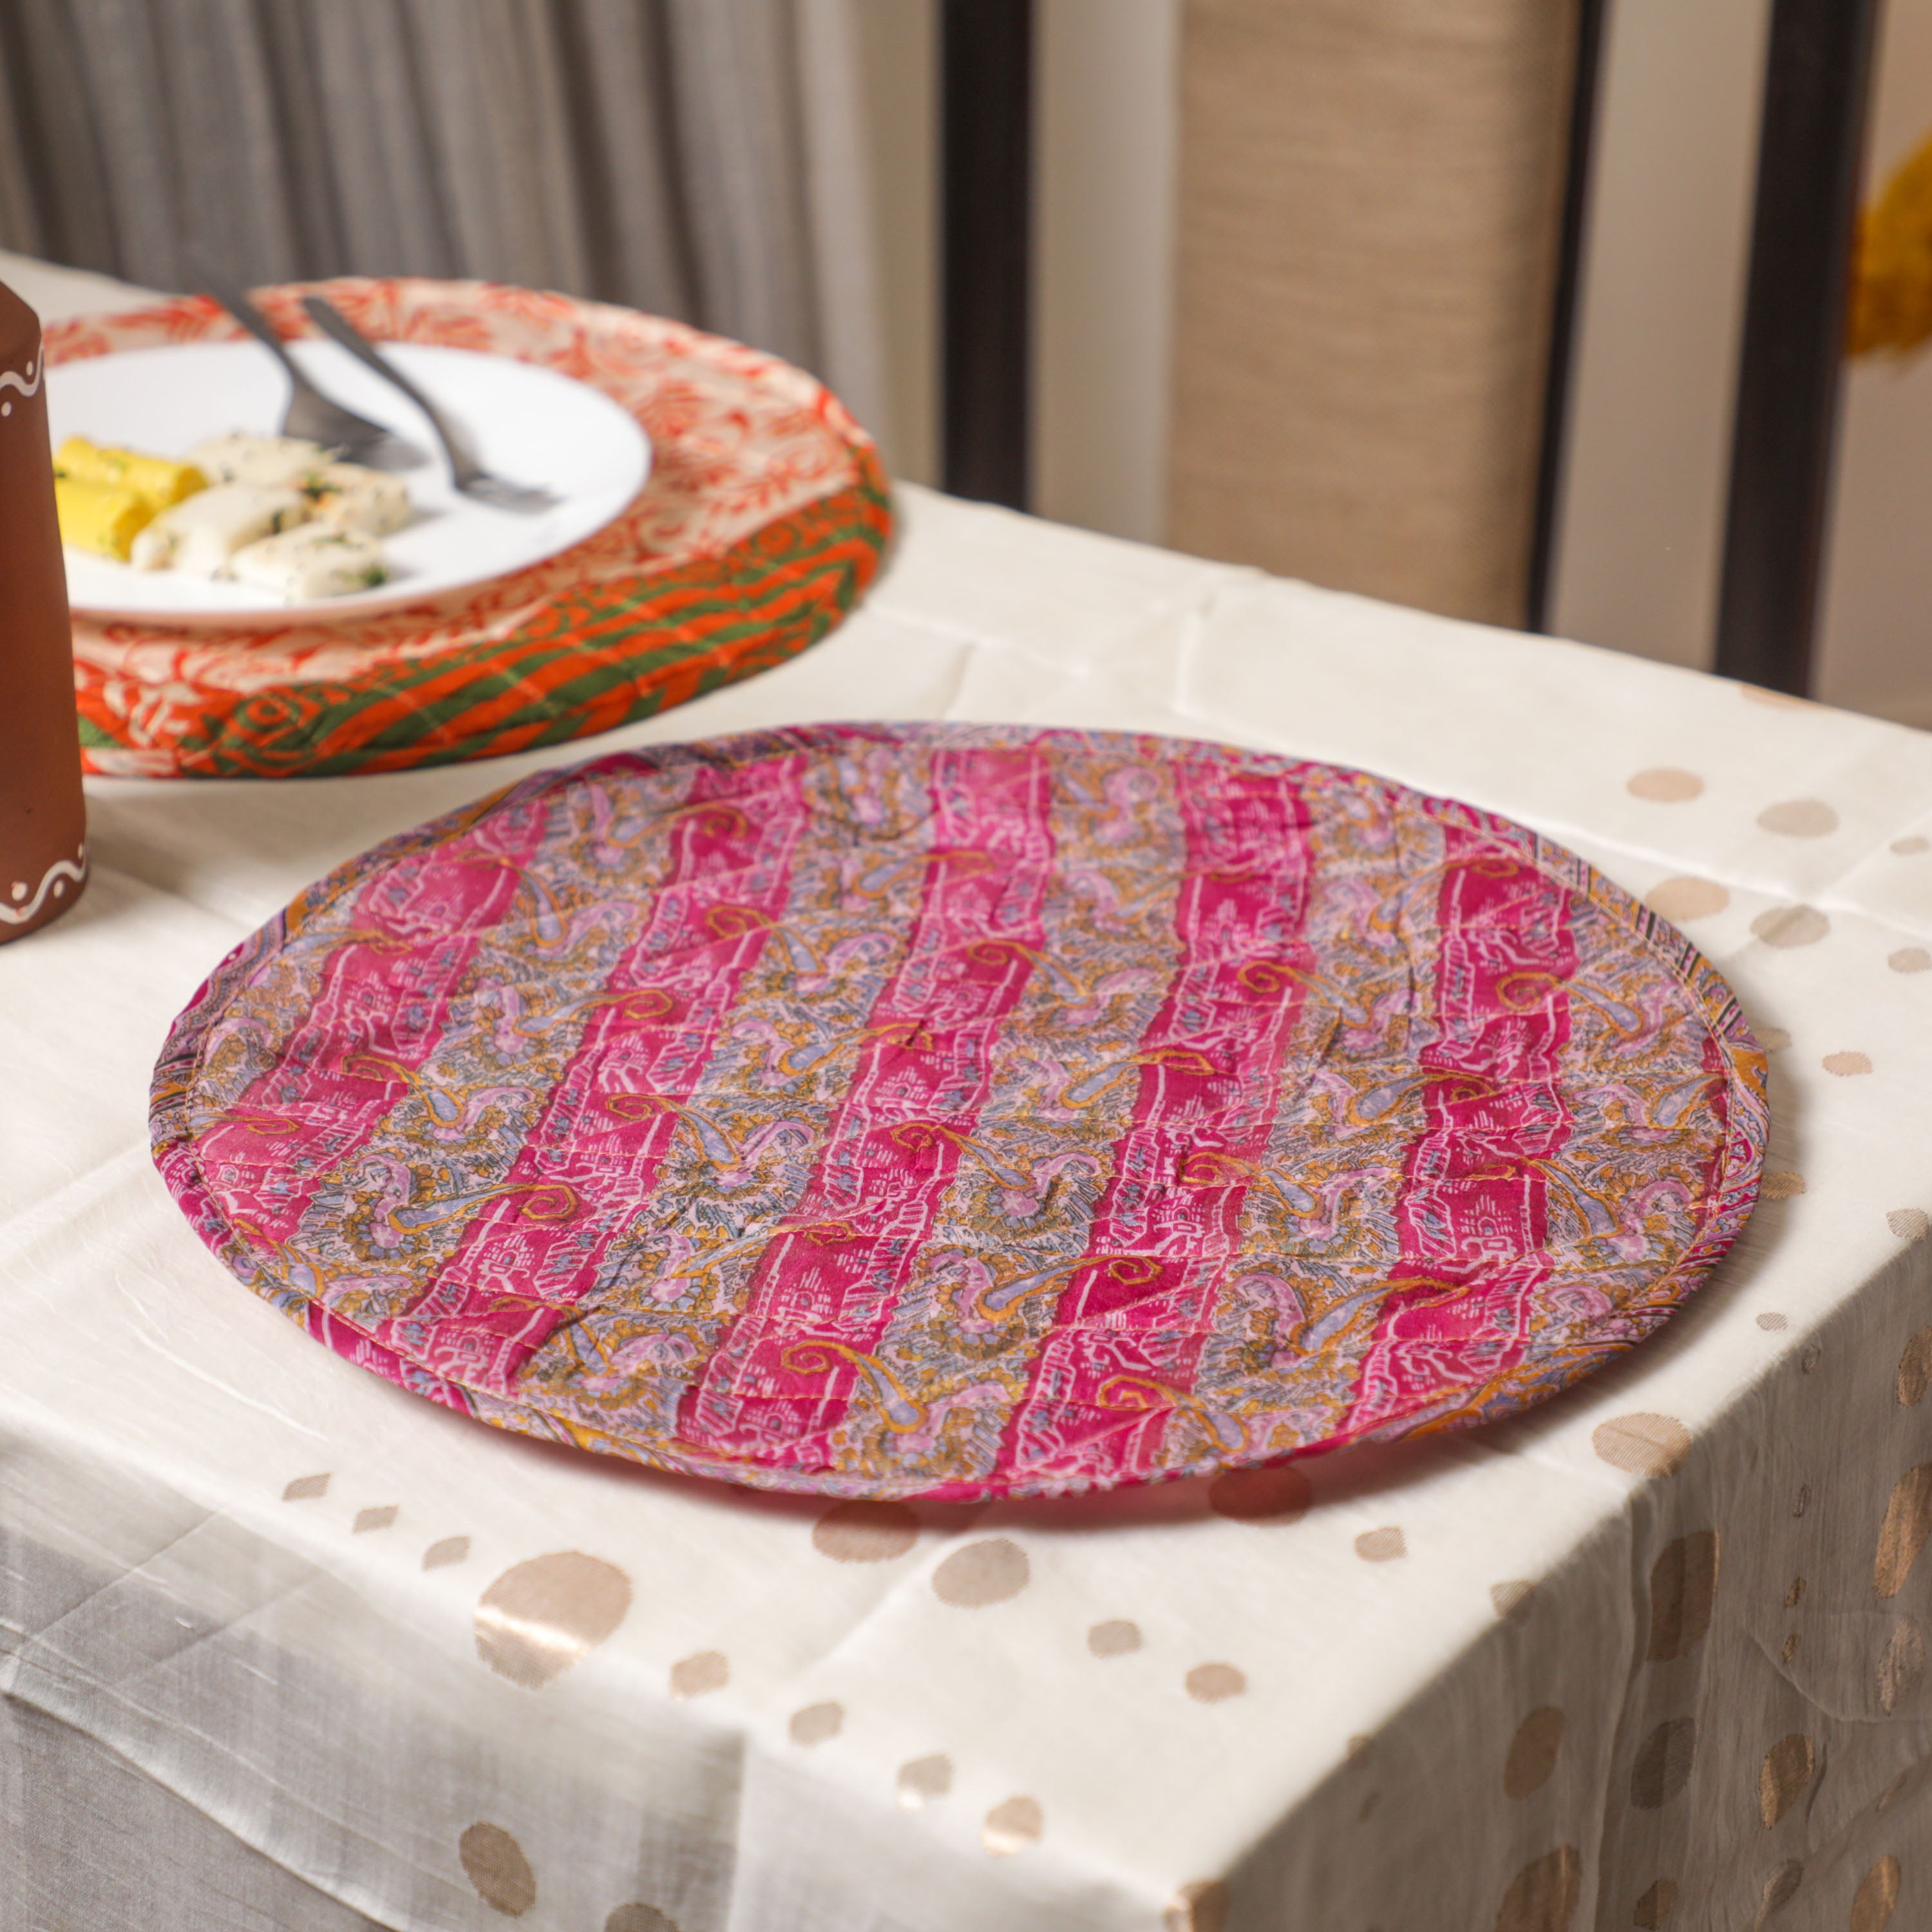 highly durable table placemats for your dining table